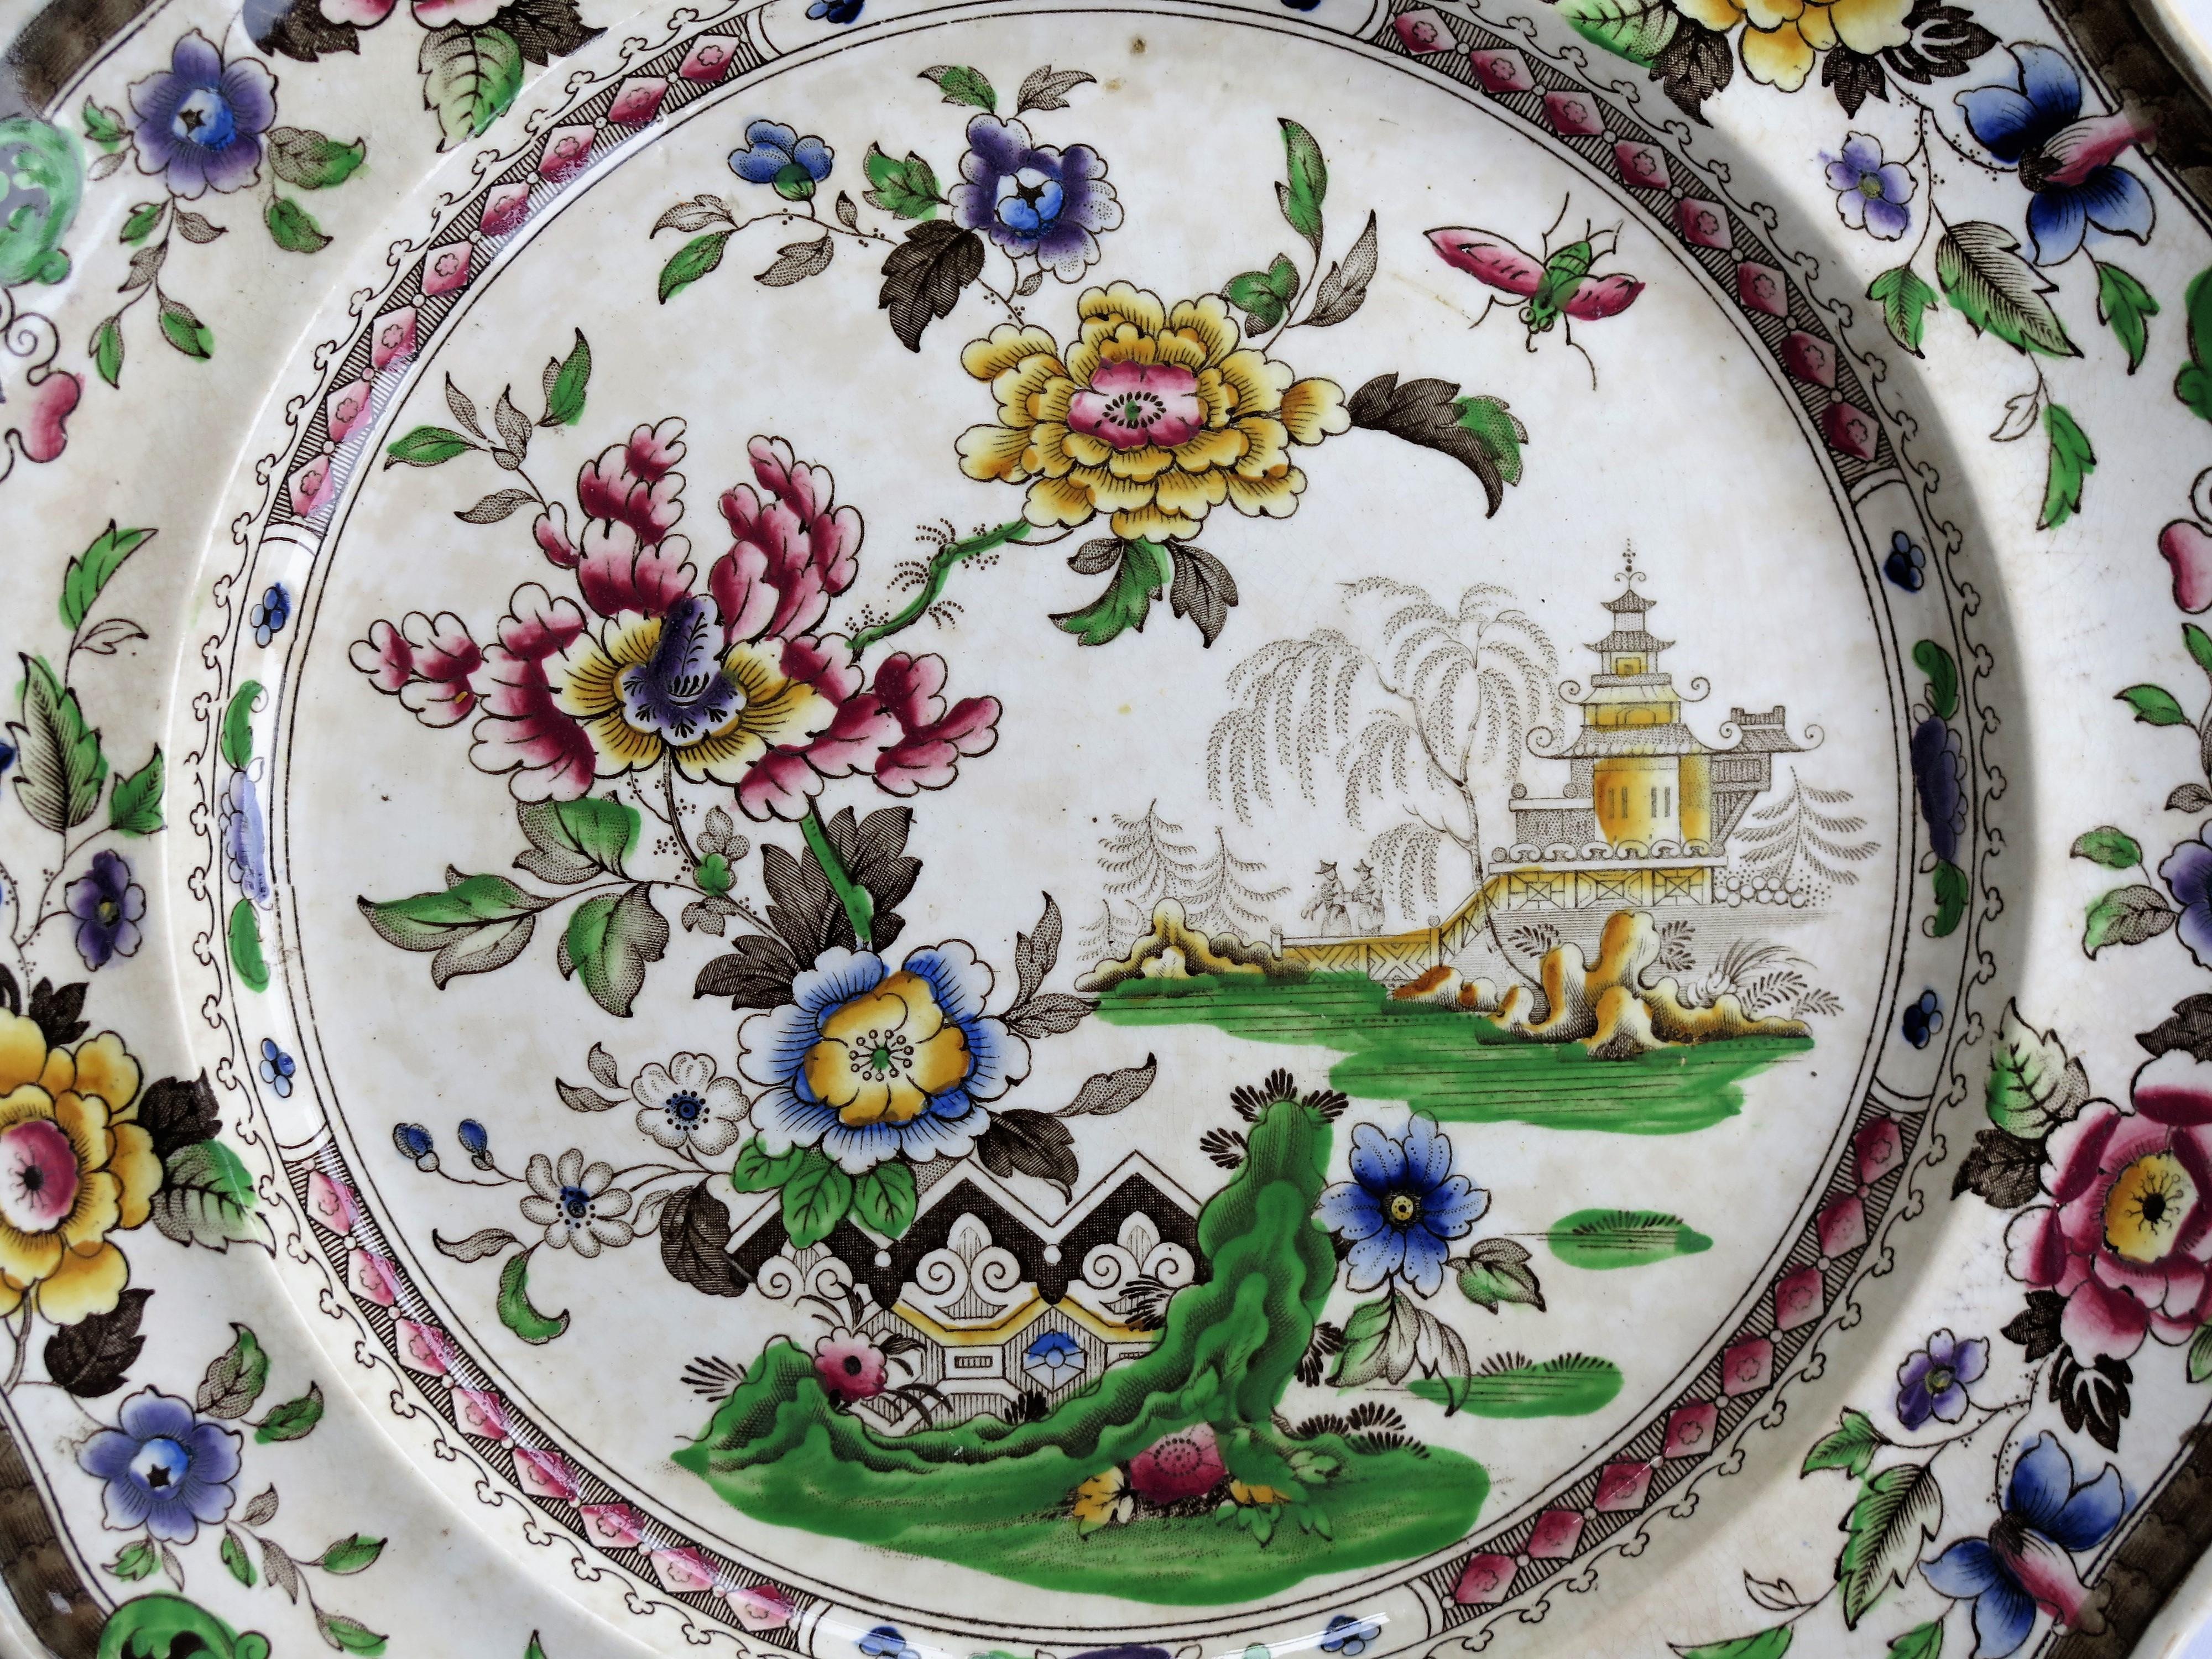 SIX Large Pottery Dinner Plates by Zachariah Boyle Chinese Flora Ptn, circa 1825 3